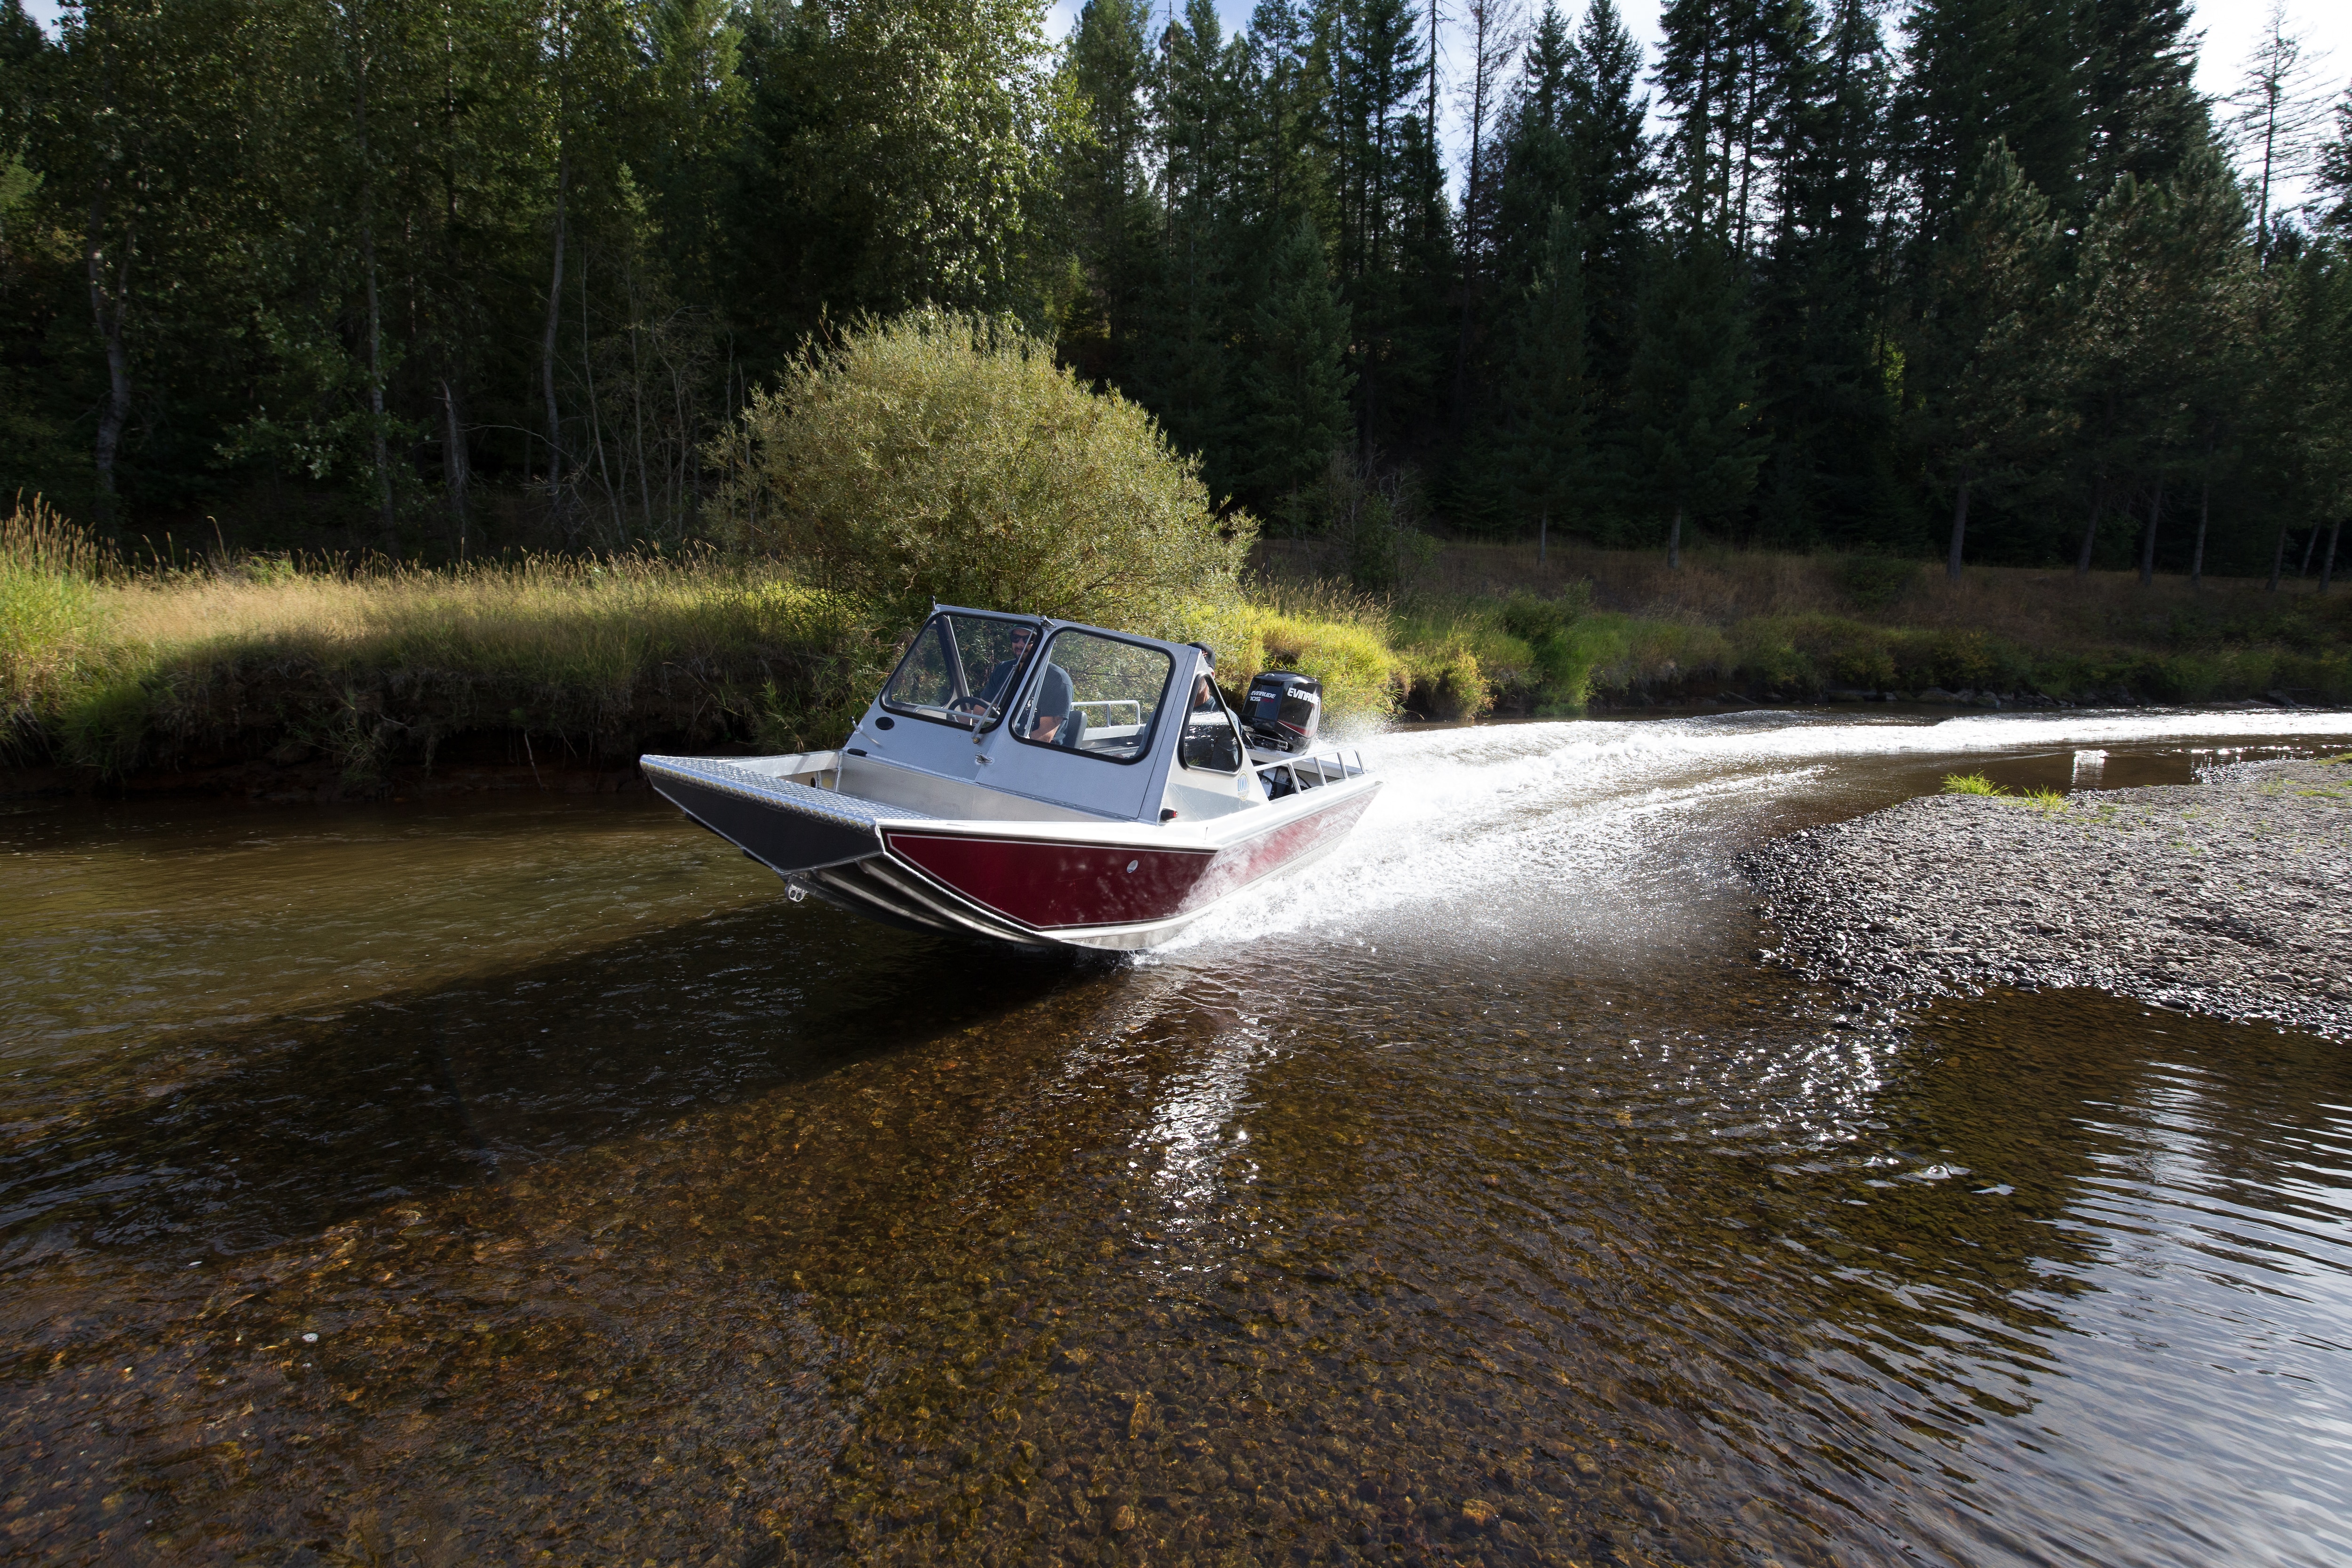 Man driving small boat across shallow water